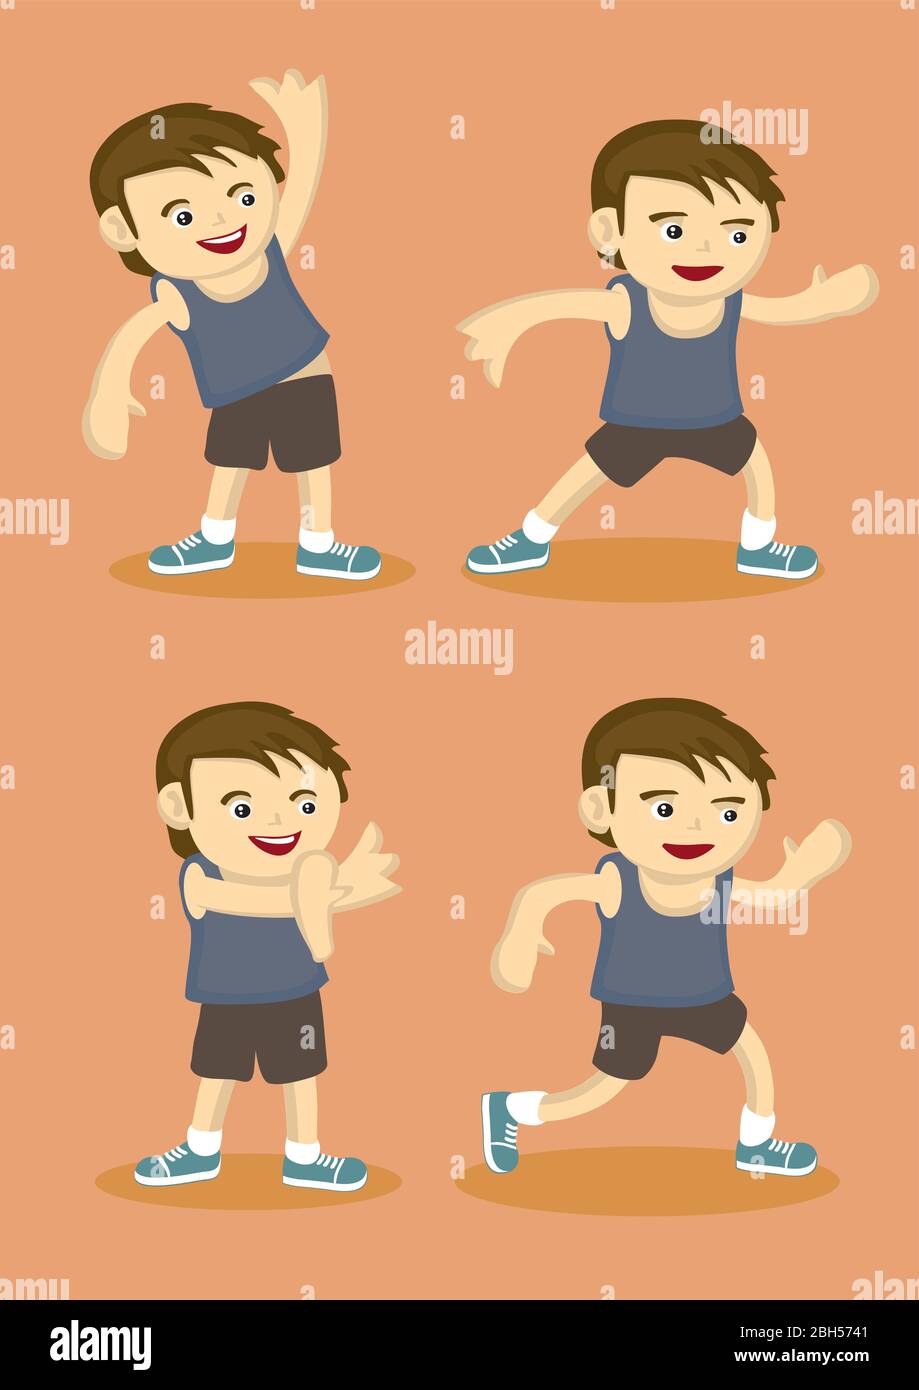 Vector illustration of a young boy in sports attire doing simple warm-up stretching exercises isolated on orange background Stock Vector